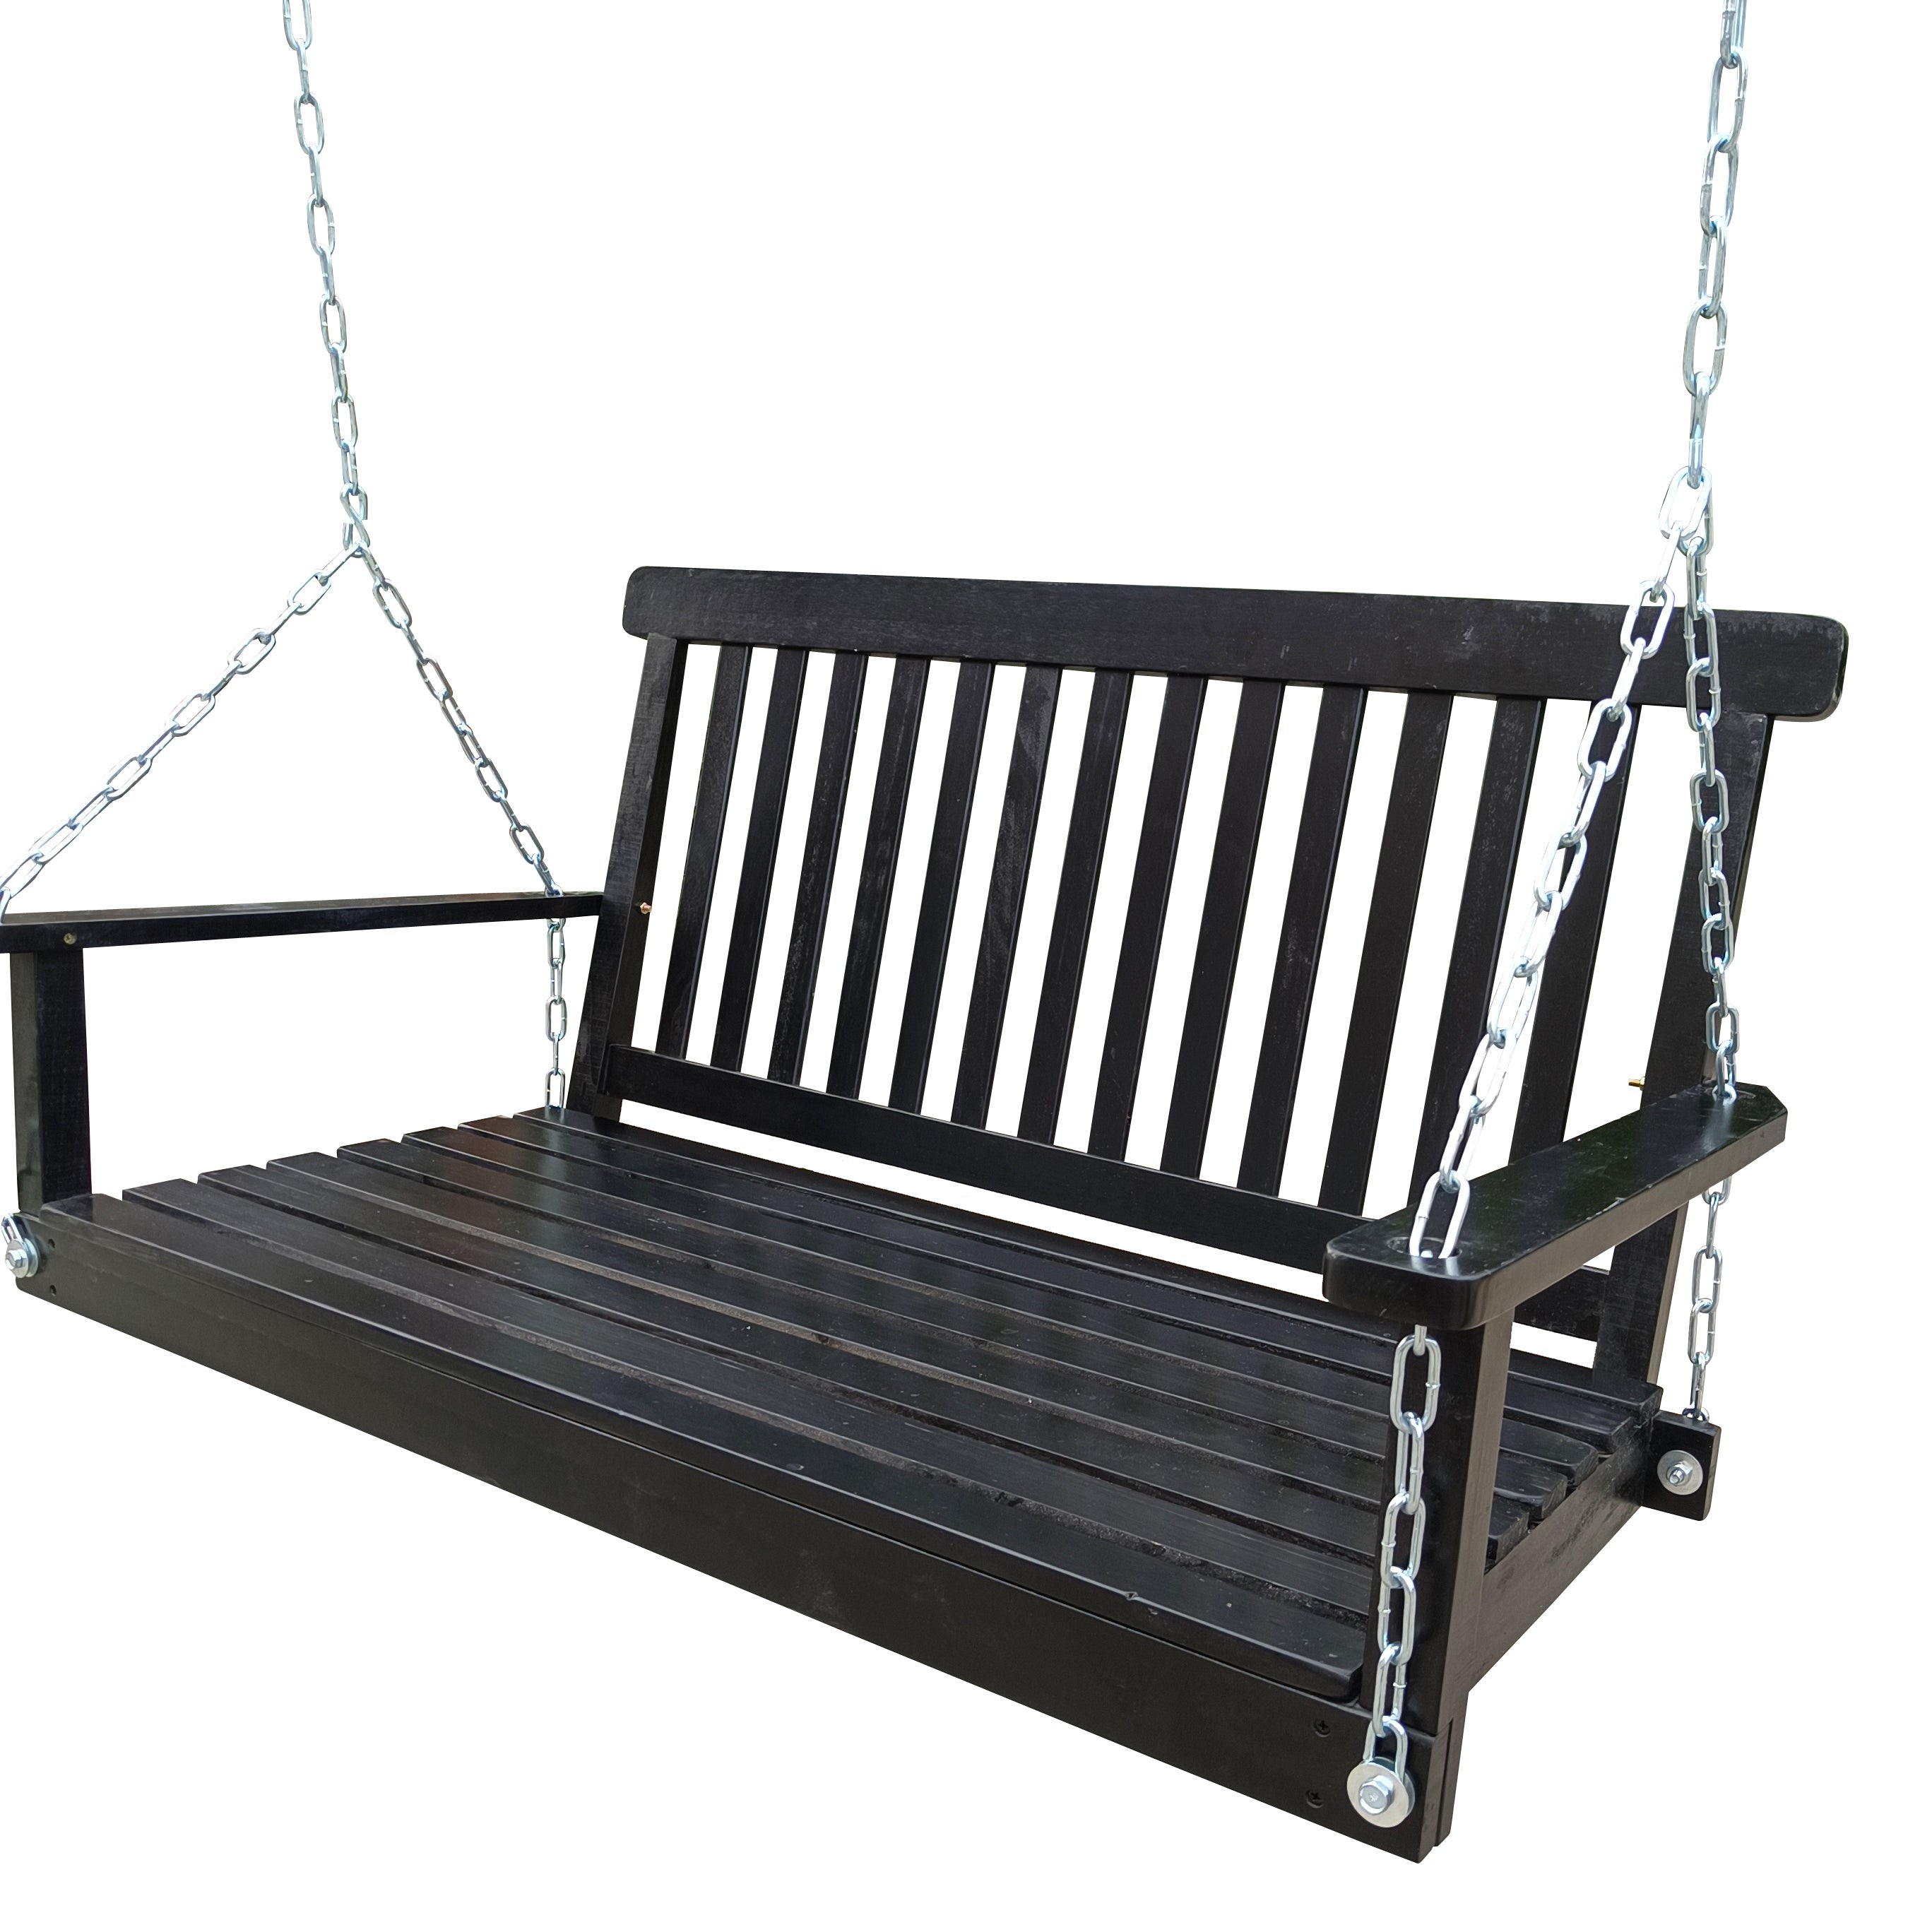 🆓🚛 Porch Swing with Armrests, Wood Bench Swing with Hanging Chains, Black